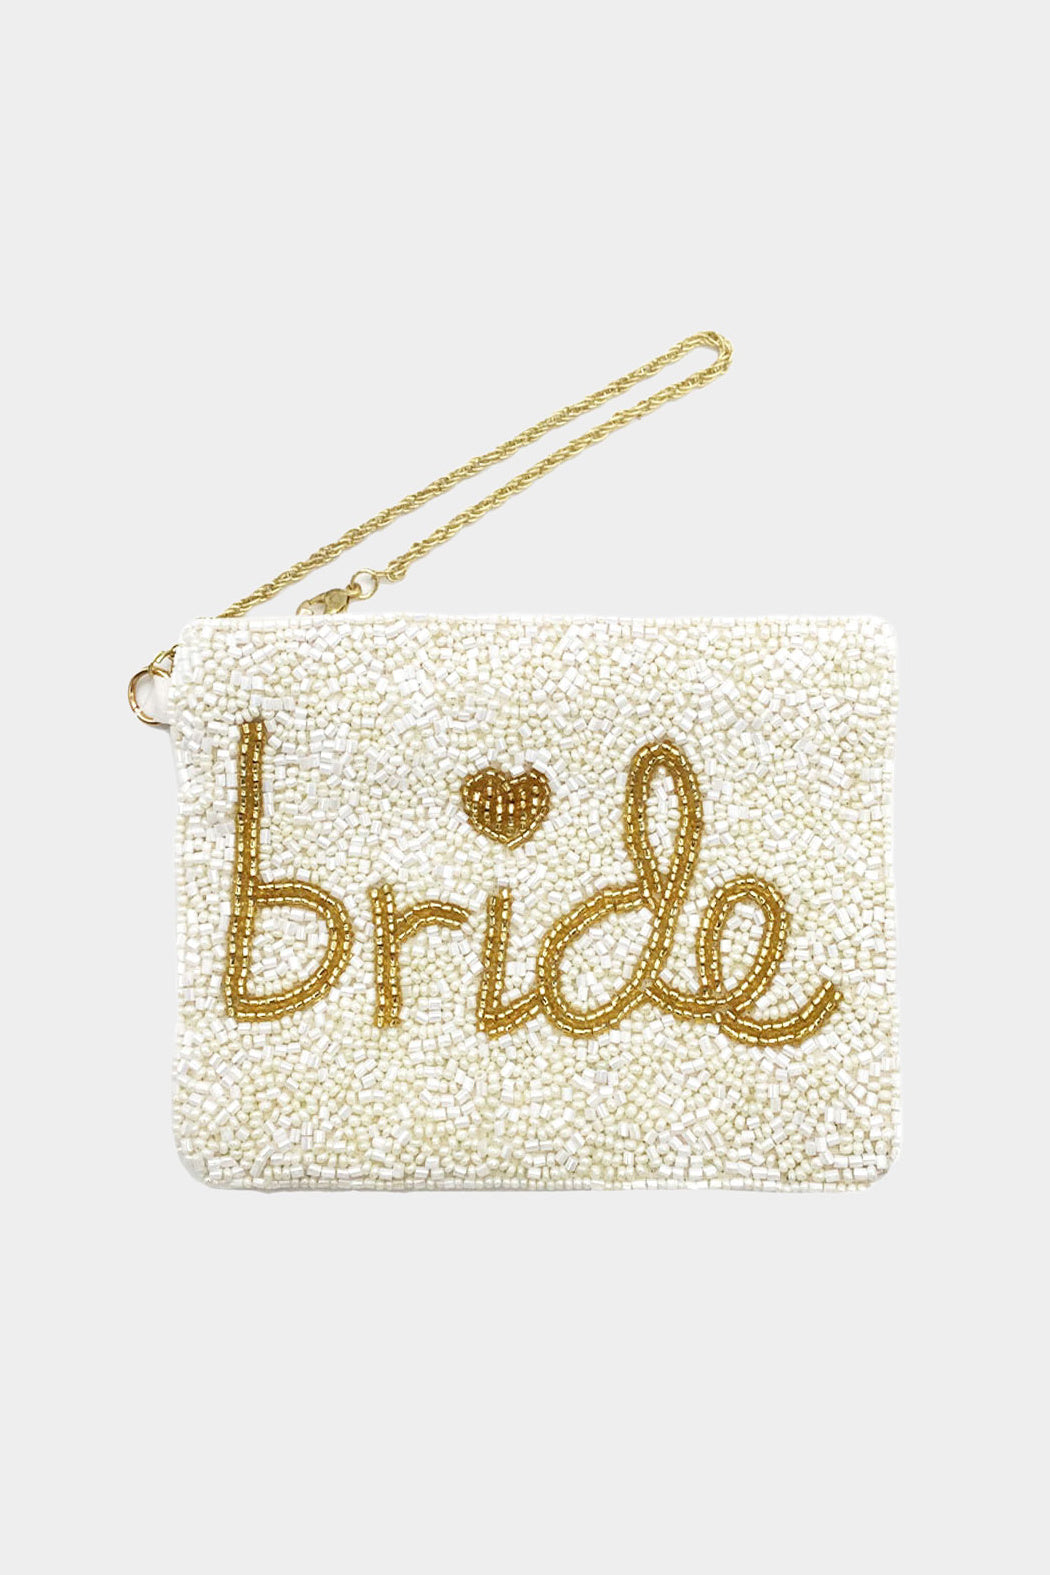 Beaded Bride Mini Bag by Embellish Your Life